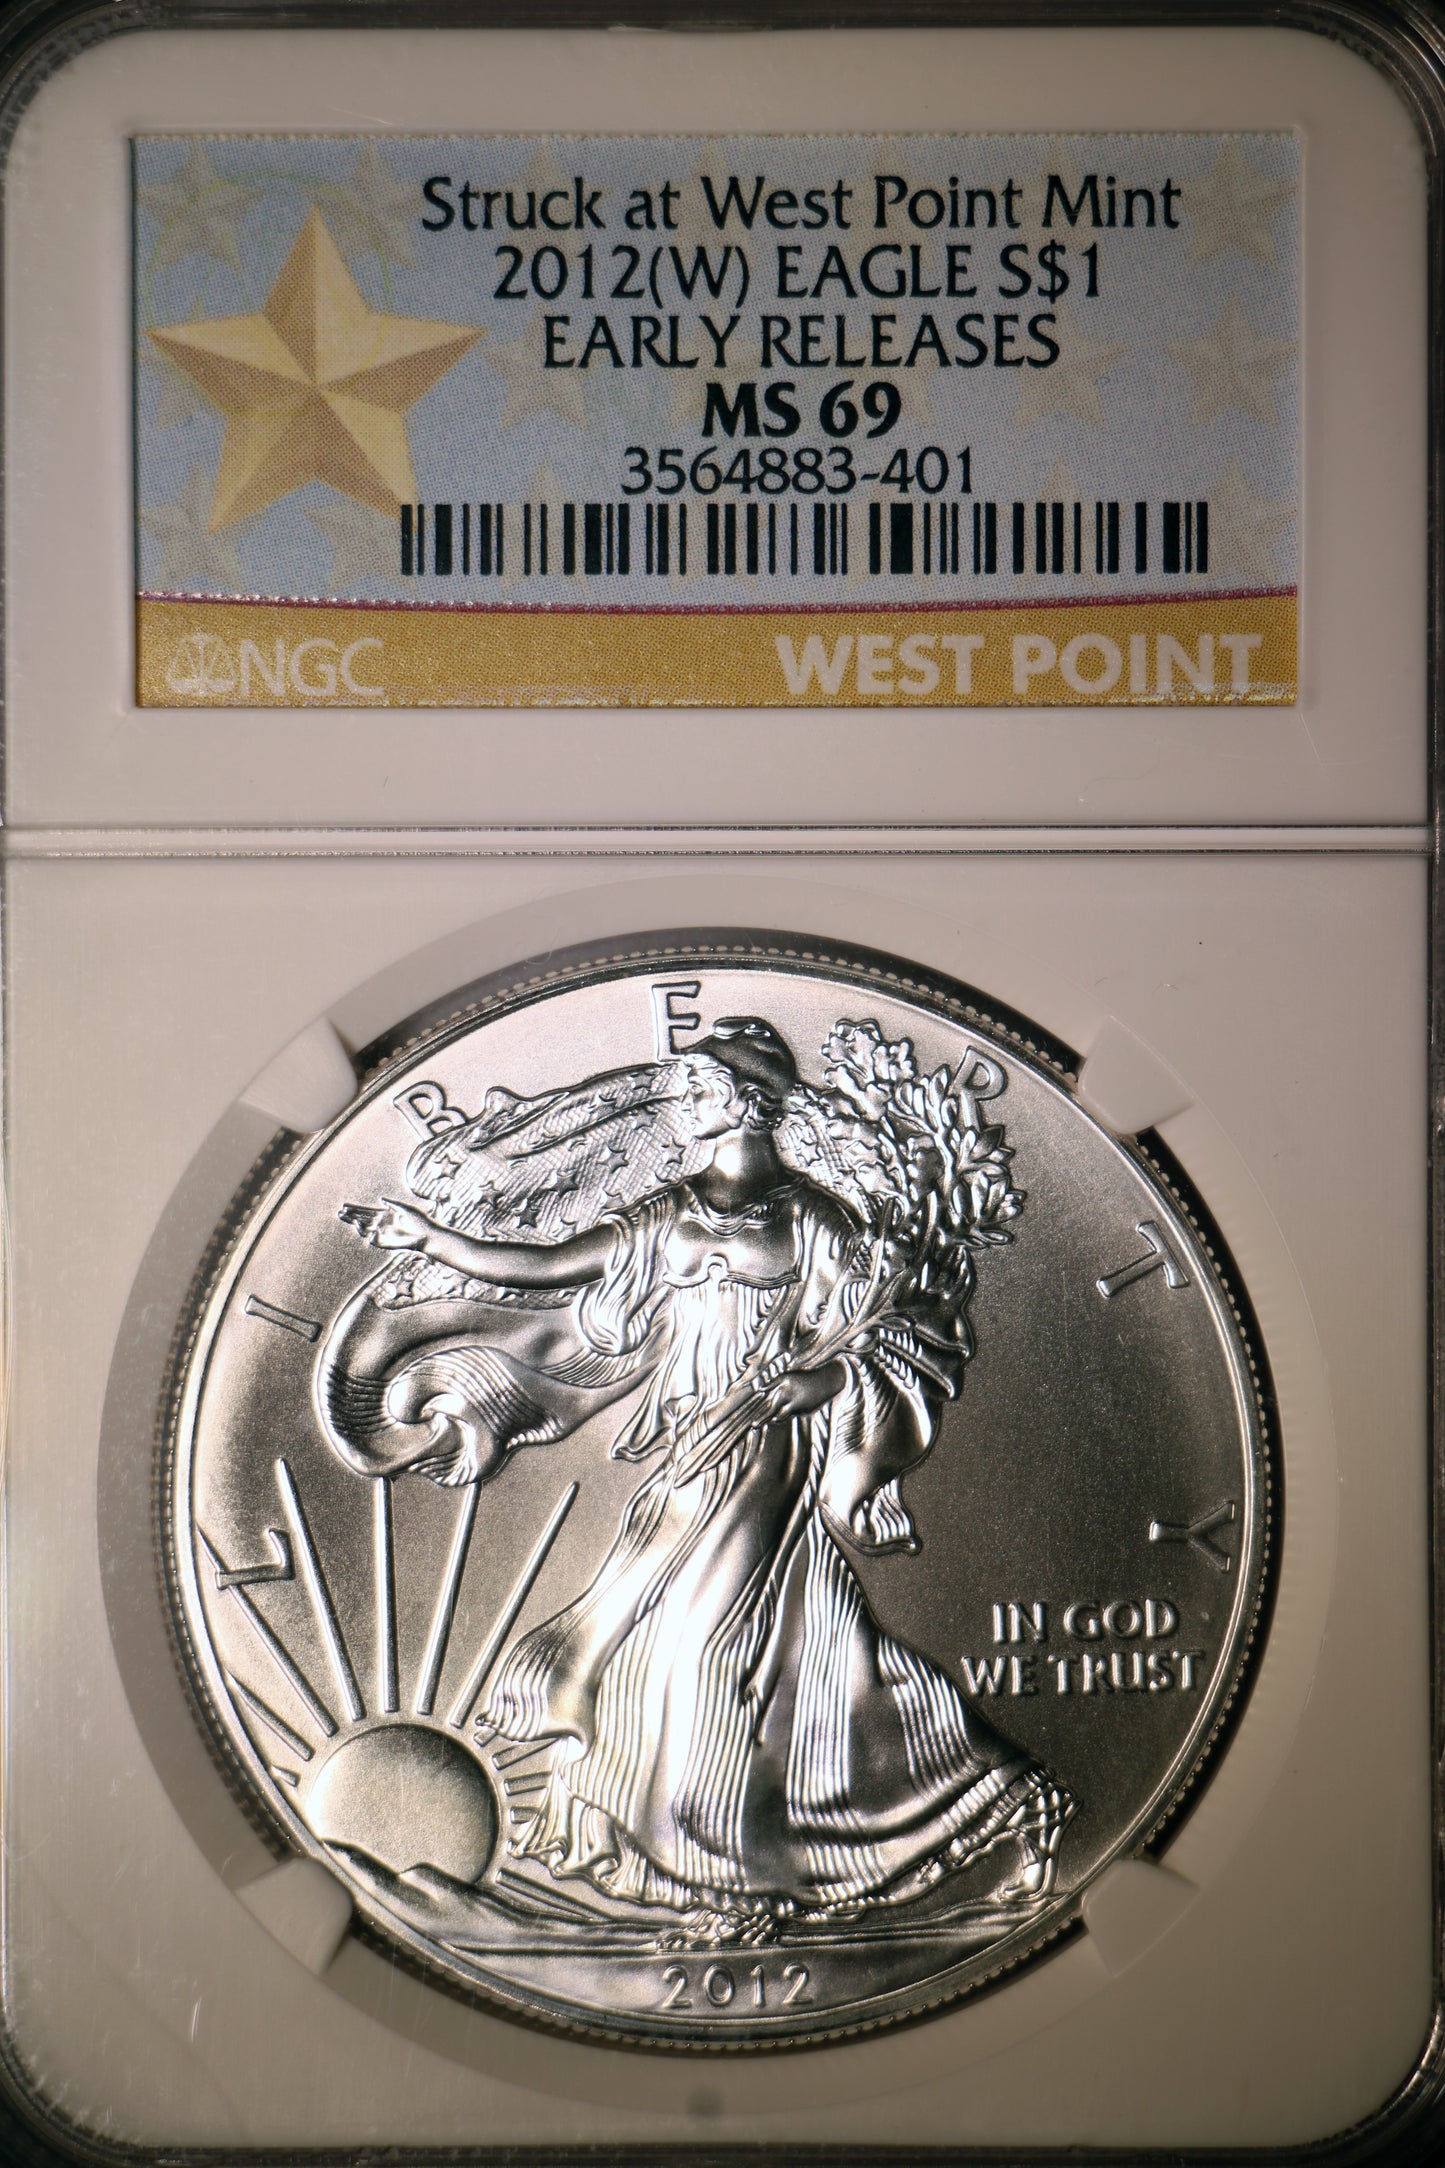 2012(W) NGC MS69 American Silver Eagle Early Releases Struck at West Point Mint